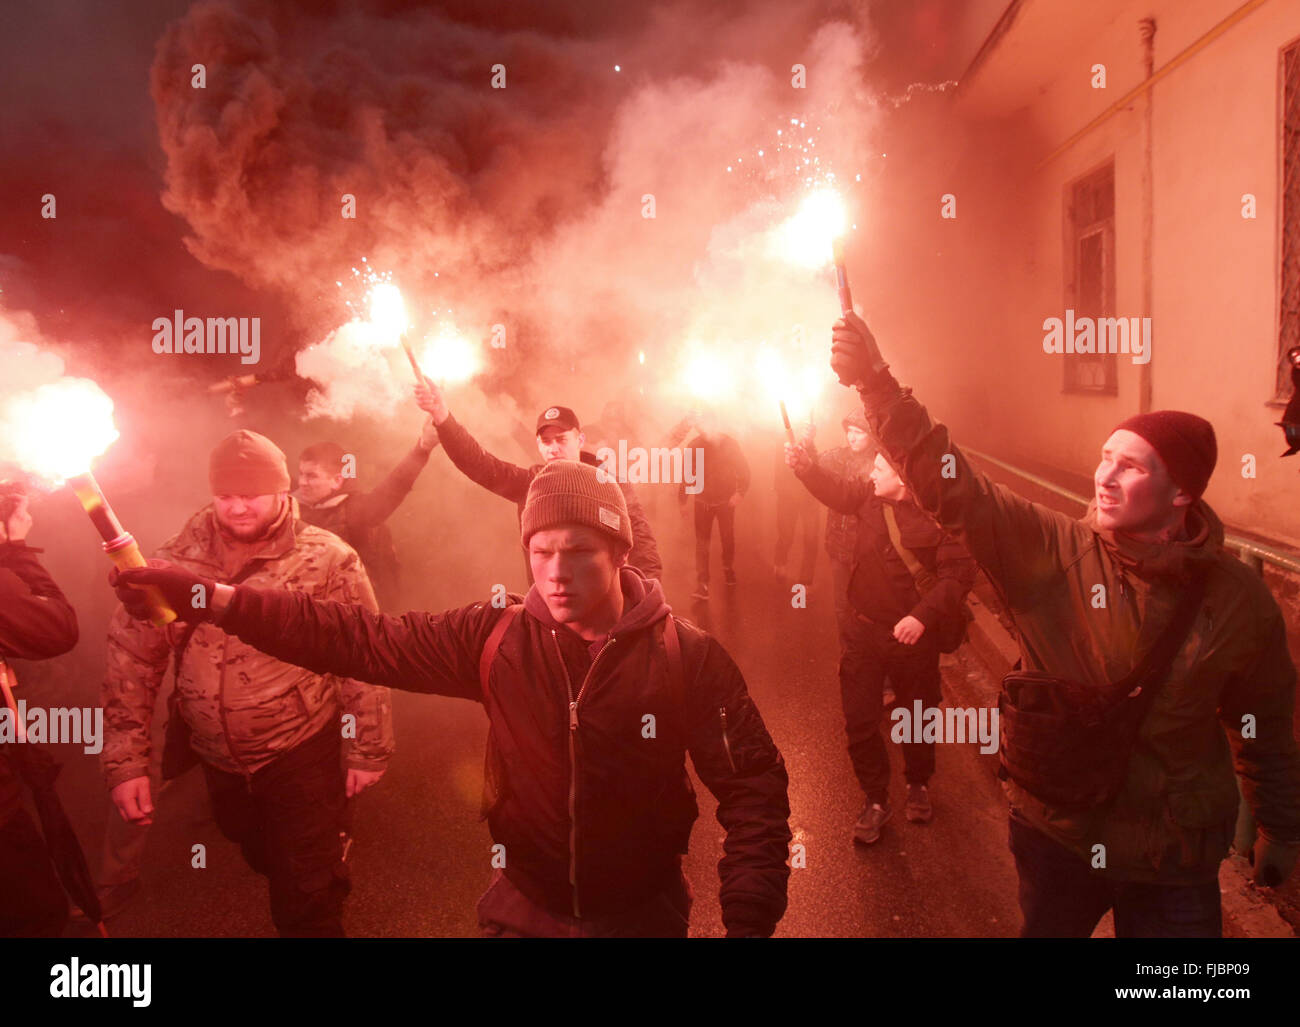 January 21, 2016 - Members and supporters of regiment ''Azov'' light flares during a protest against detention of Head of the Civil Corps ''Azov-Crimea'' Stanislav Krasnov and activist Oksana Shelest in Kiev, Ukraine on March 01, 2016. Stanislav Krasnov and activist Oksana Shelest was detained by the Security Service of Ukraine on the night of 28 February, and preliminarily charged with illegal possession of weapons and connections with the Russian intelligence agencies, according to local media. © Anatolii Stepanov/ZUMA Wire/Alamy Live News Stock Photo